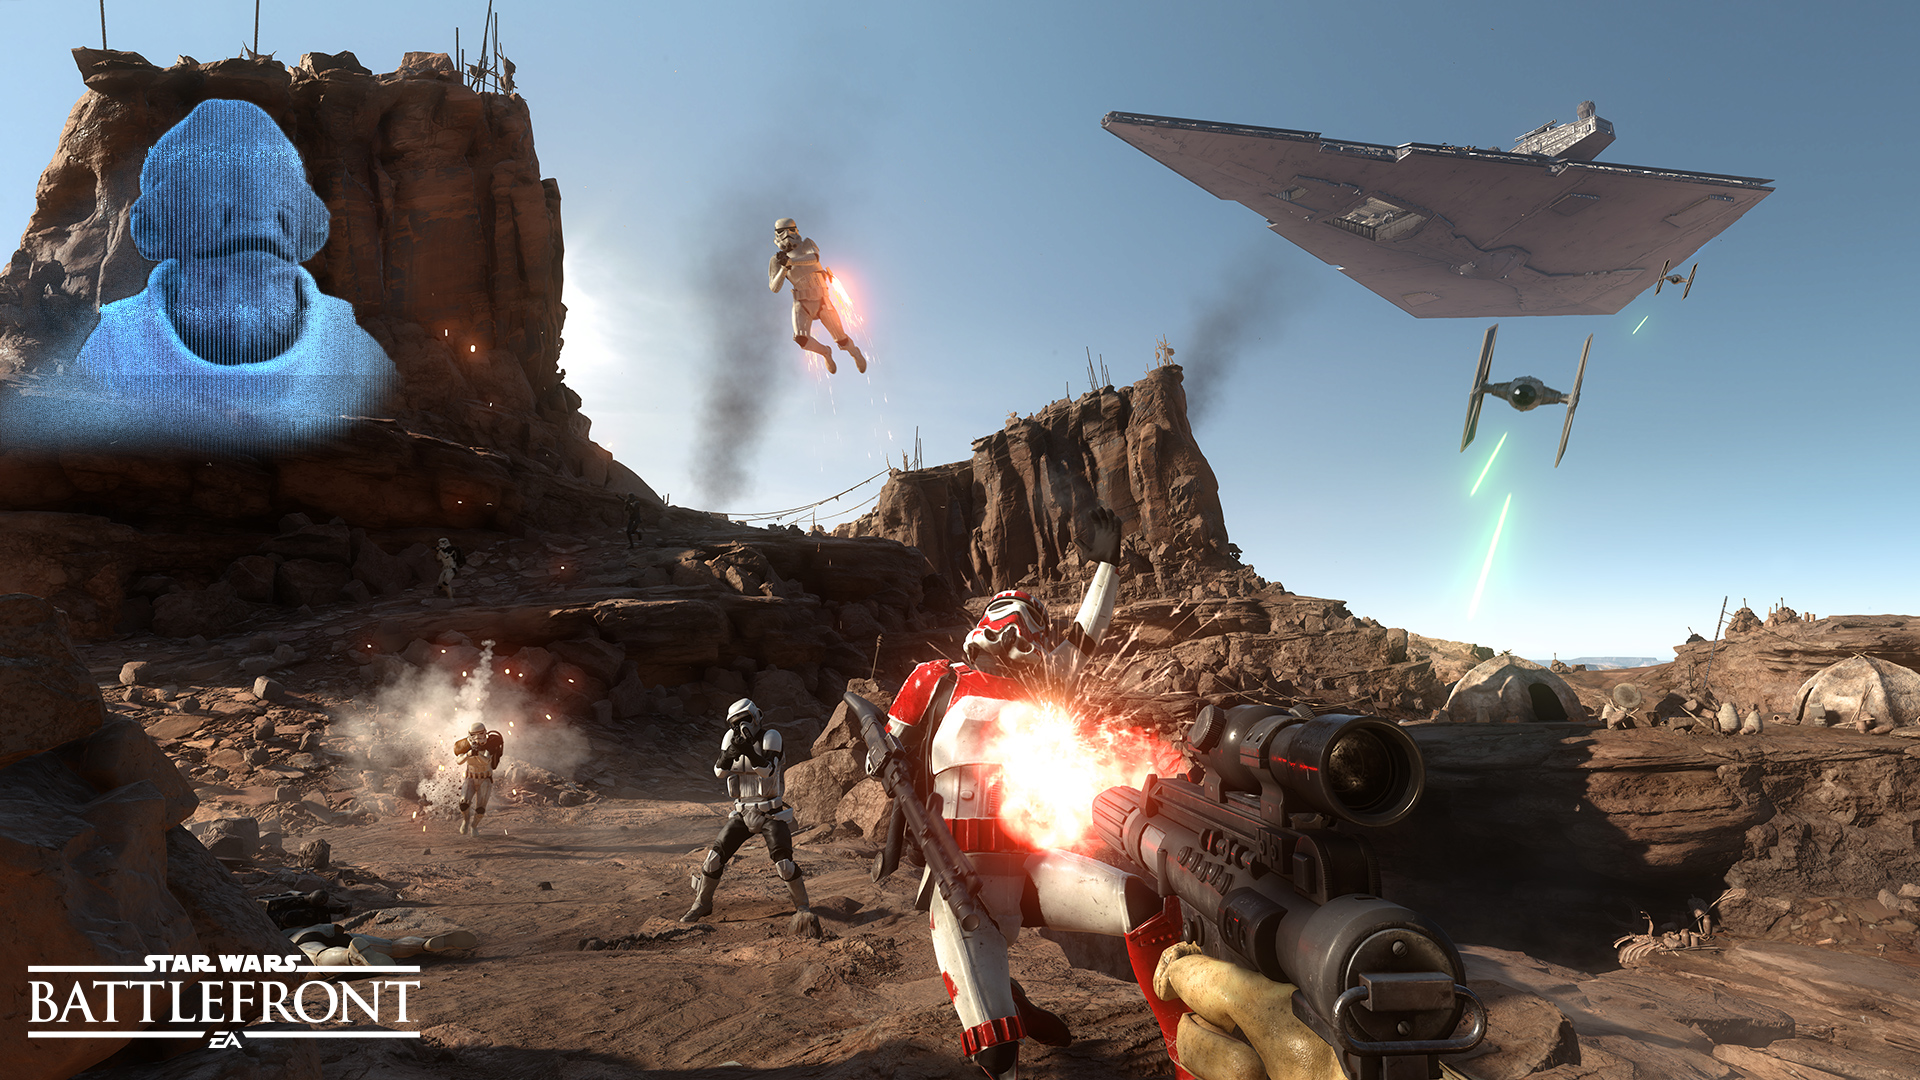 Star Wars Battlefront Themepack With HD Wallpaper